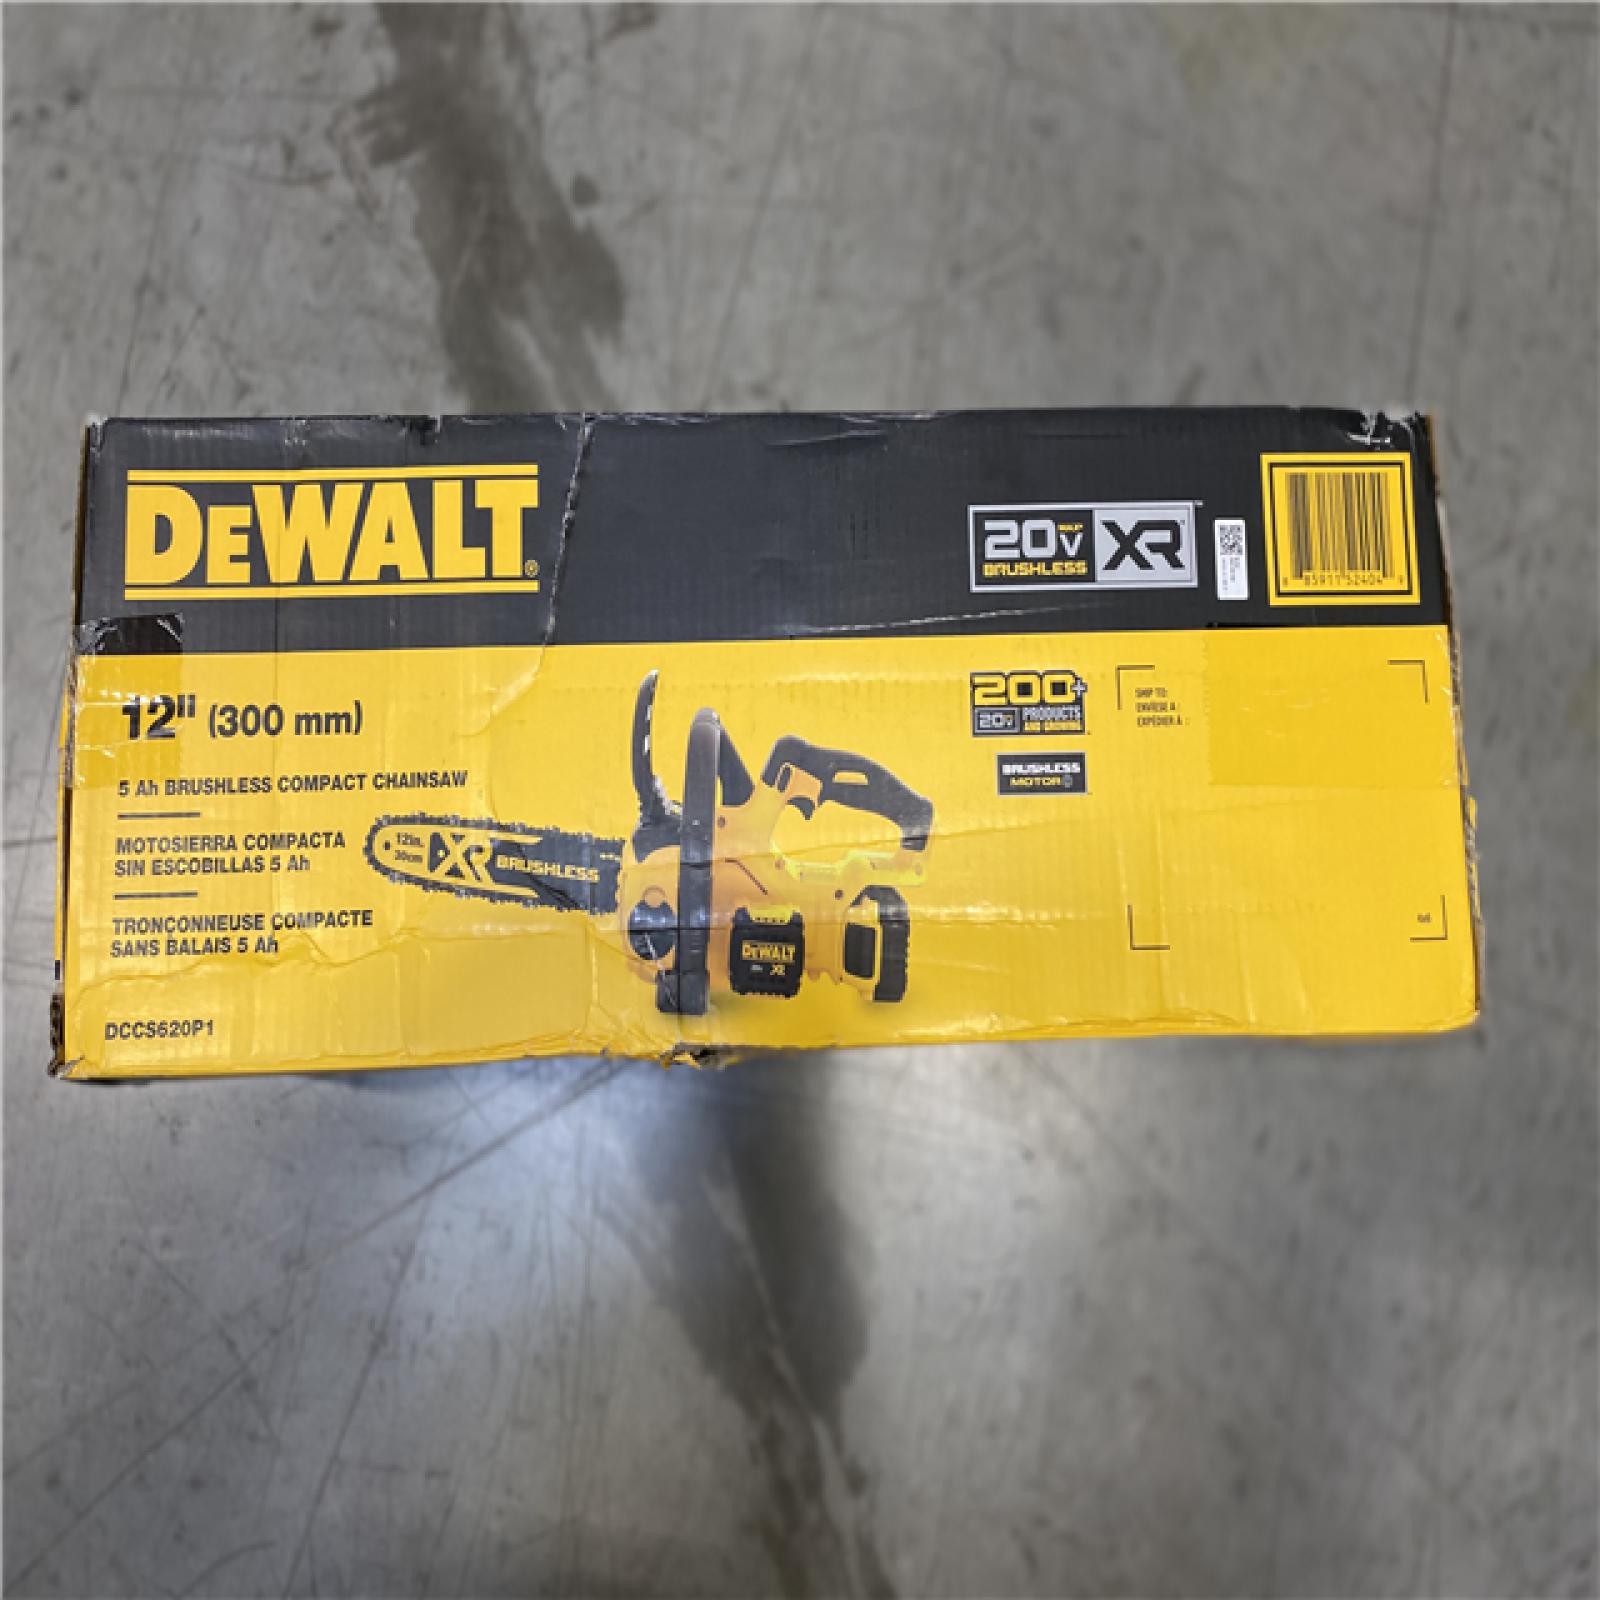 NEW! - DEWALT 20V MAX 12in. Brushless Cordless Battery Powered Chainsaw Kit with (1) 5 Ah Battery & Charger